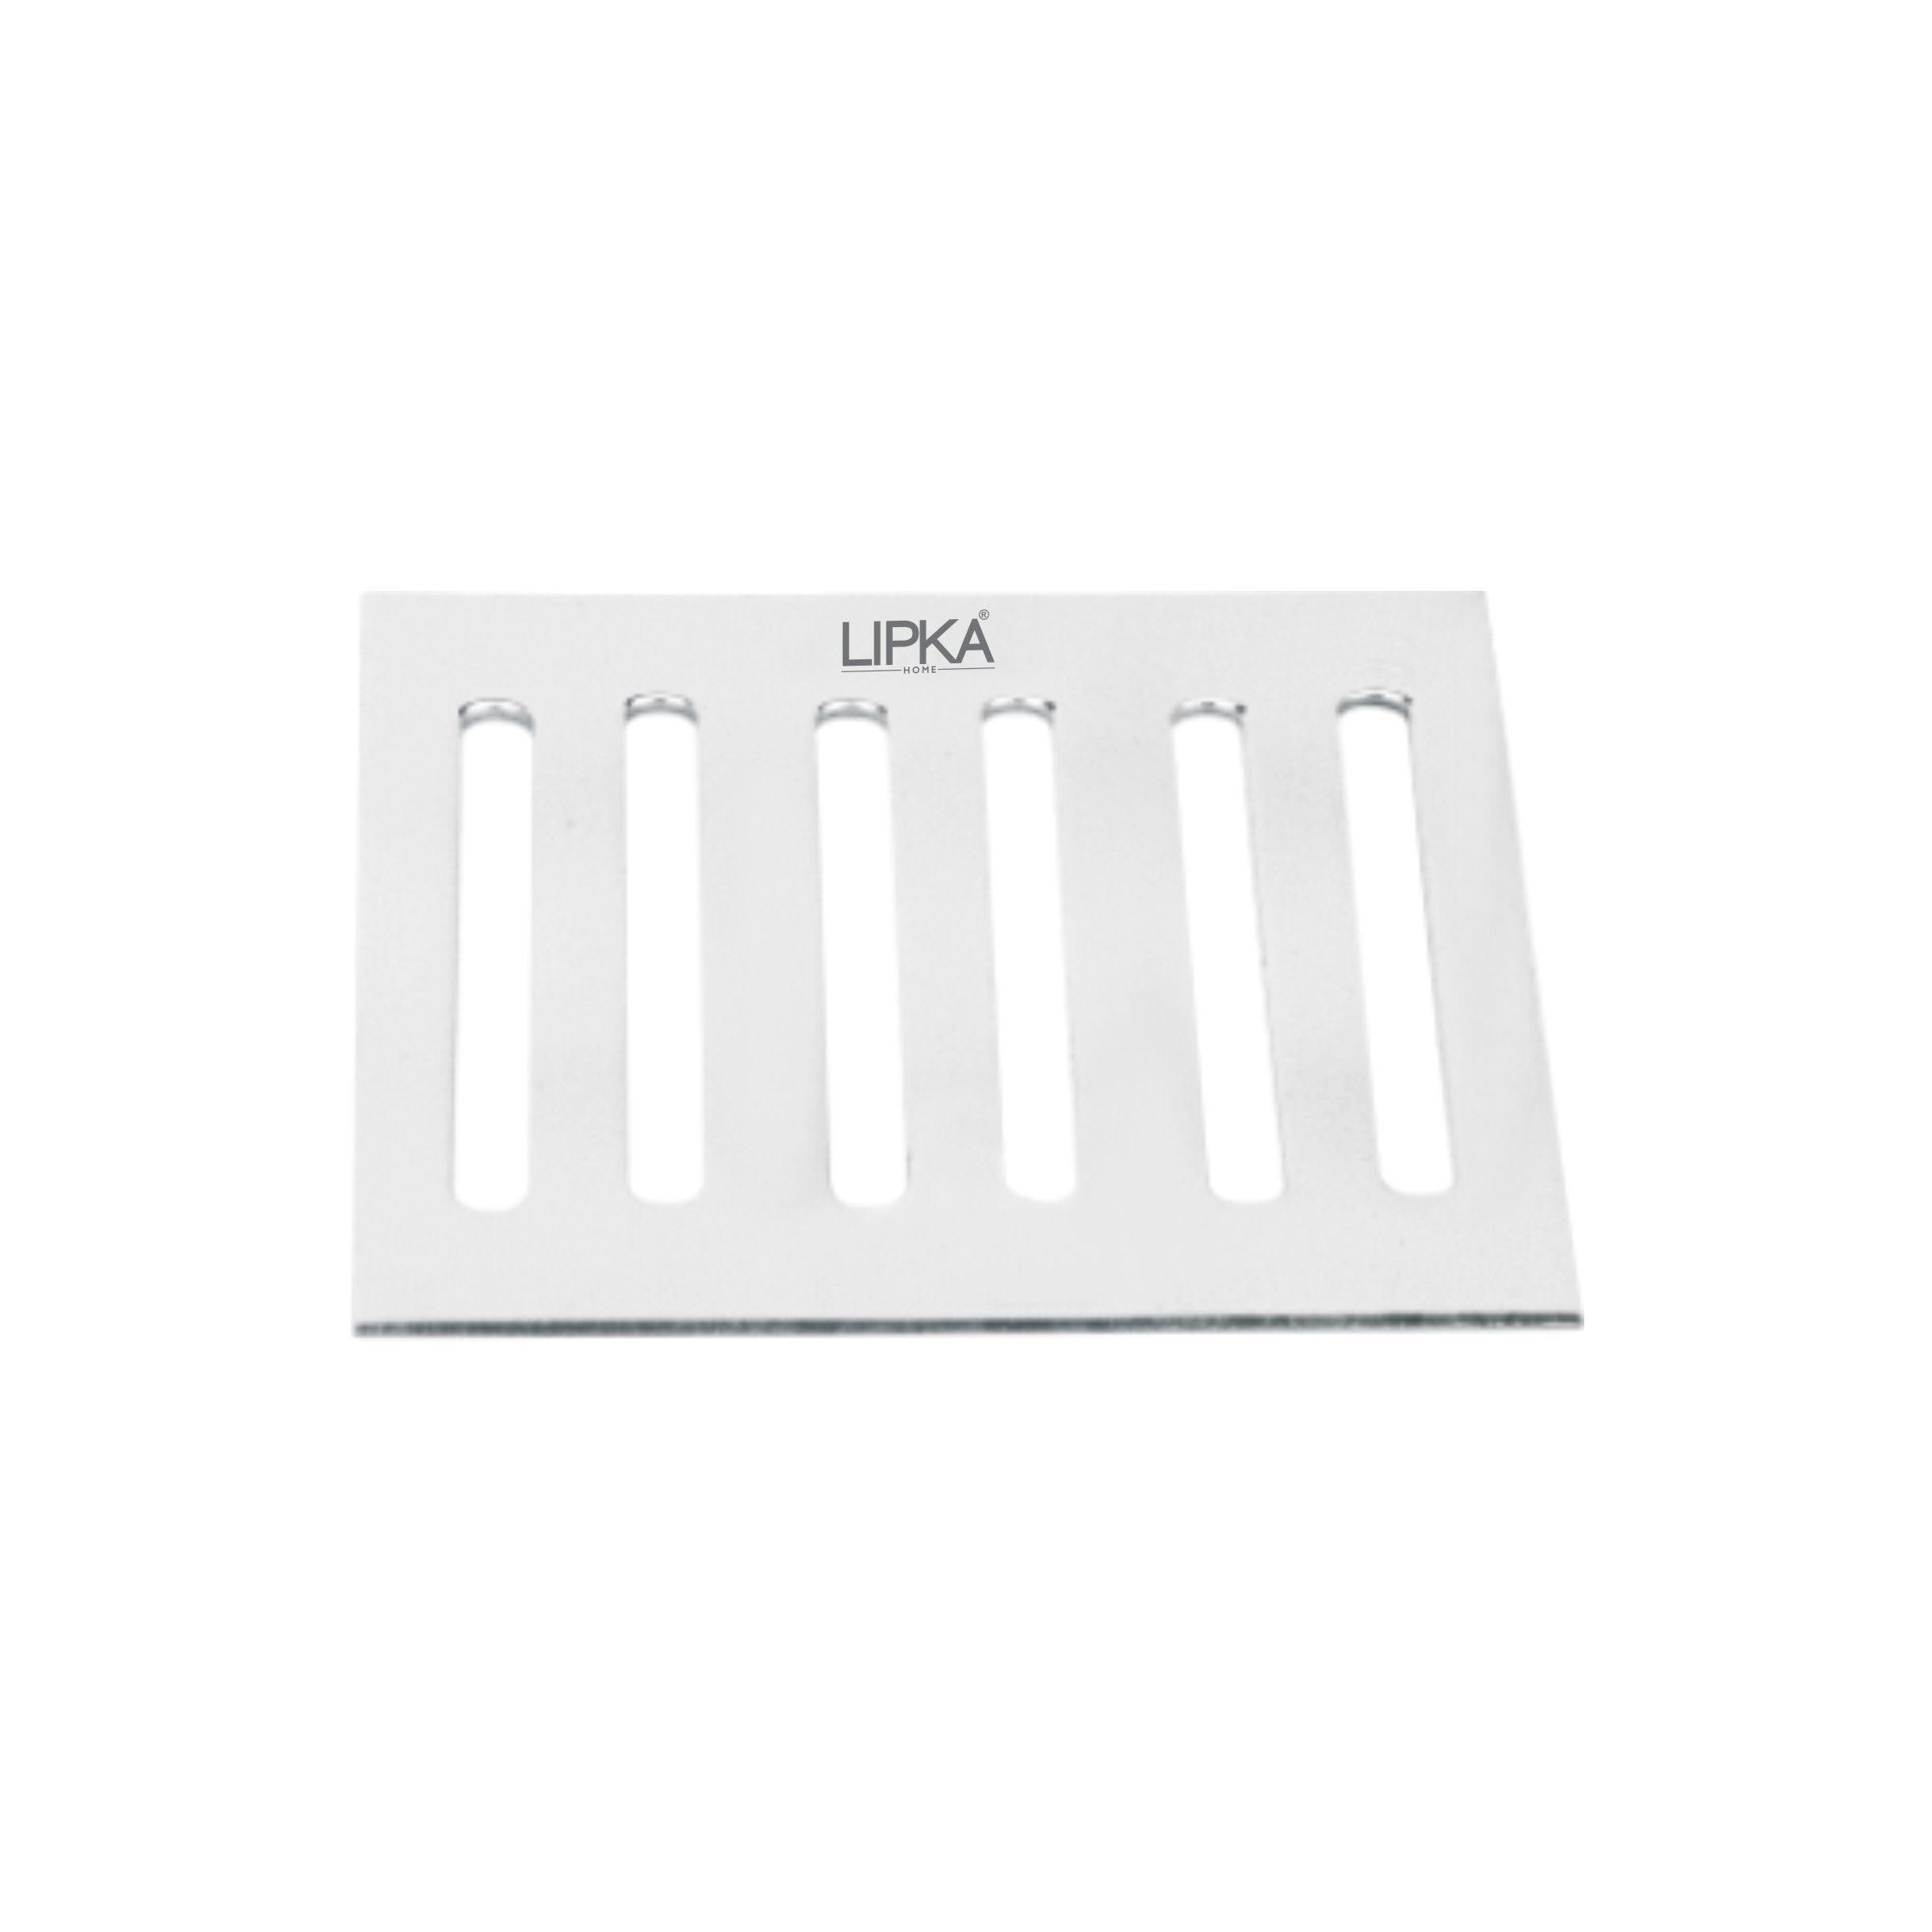 Vertical Grating Top (3 x 3 inches) - LIPKA